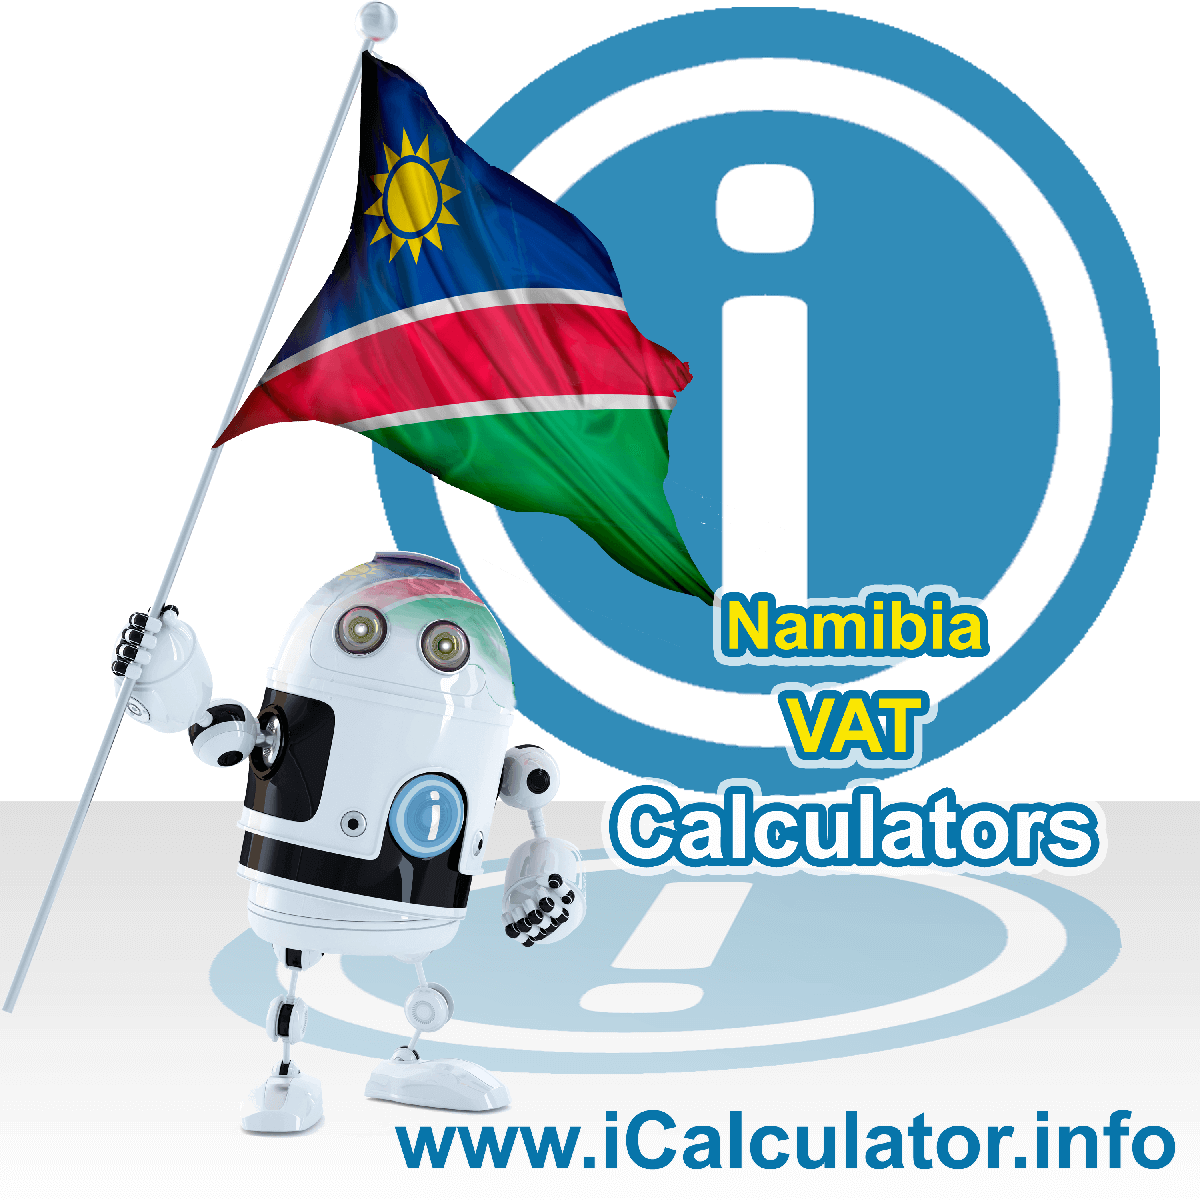 Namibia VAT Calculator. This image shows the Namibia flag and information relating to the VAT formula used for calculating Value Added Tax in Namibia using the Namibia VAT Calculator in 2023